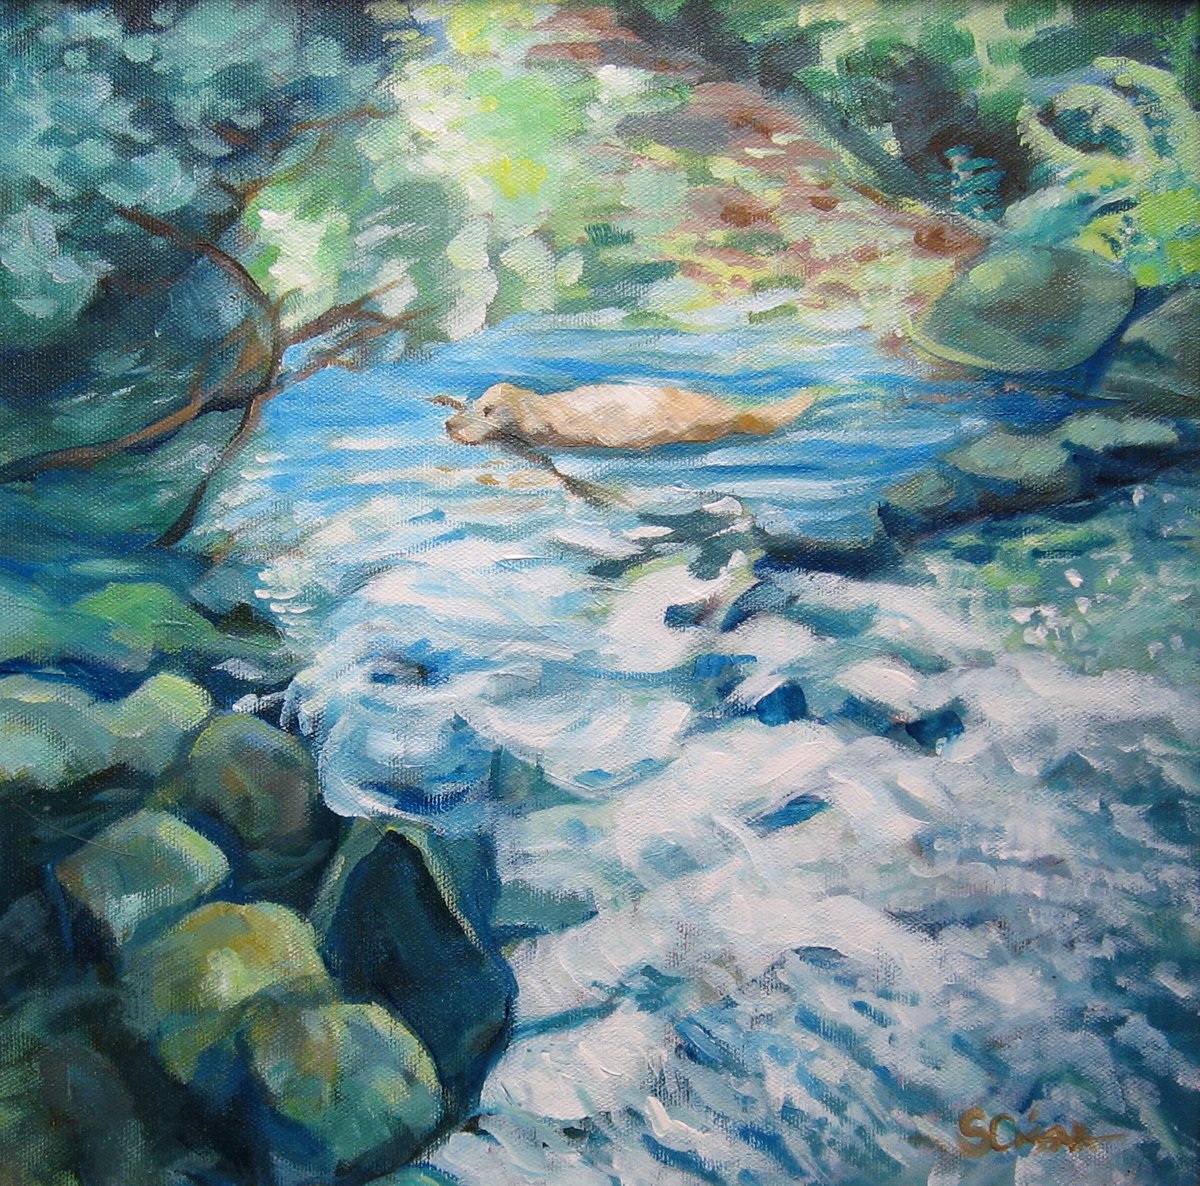 Dog Day at the Creek II by Stephanie Cissna